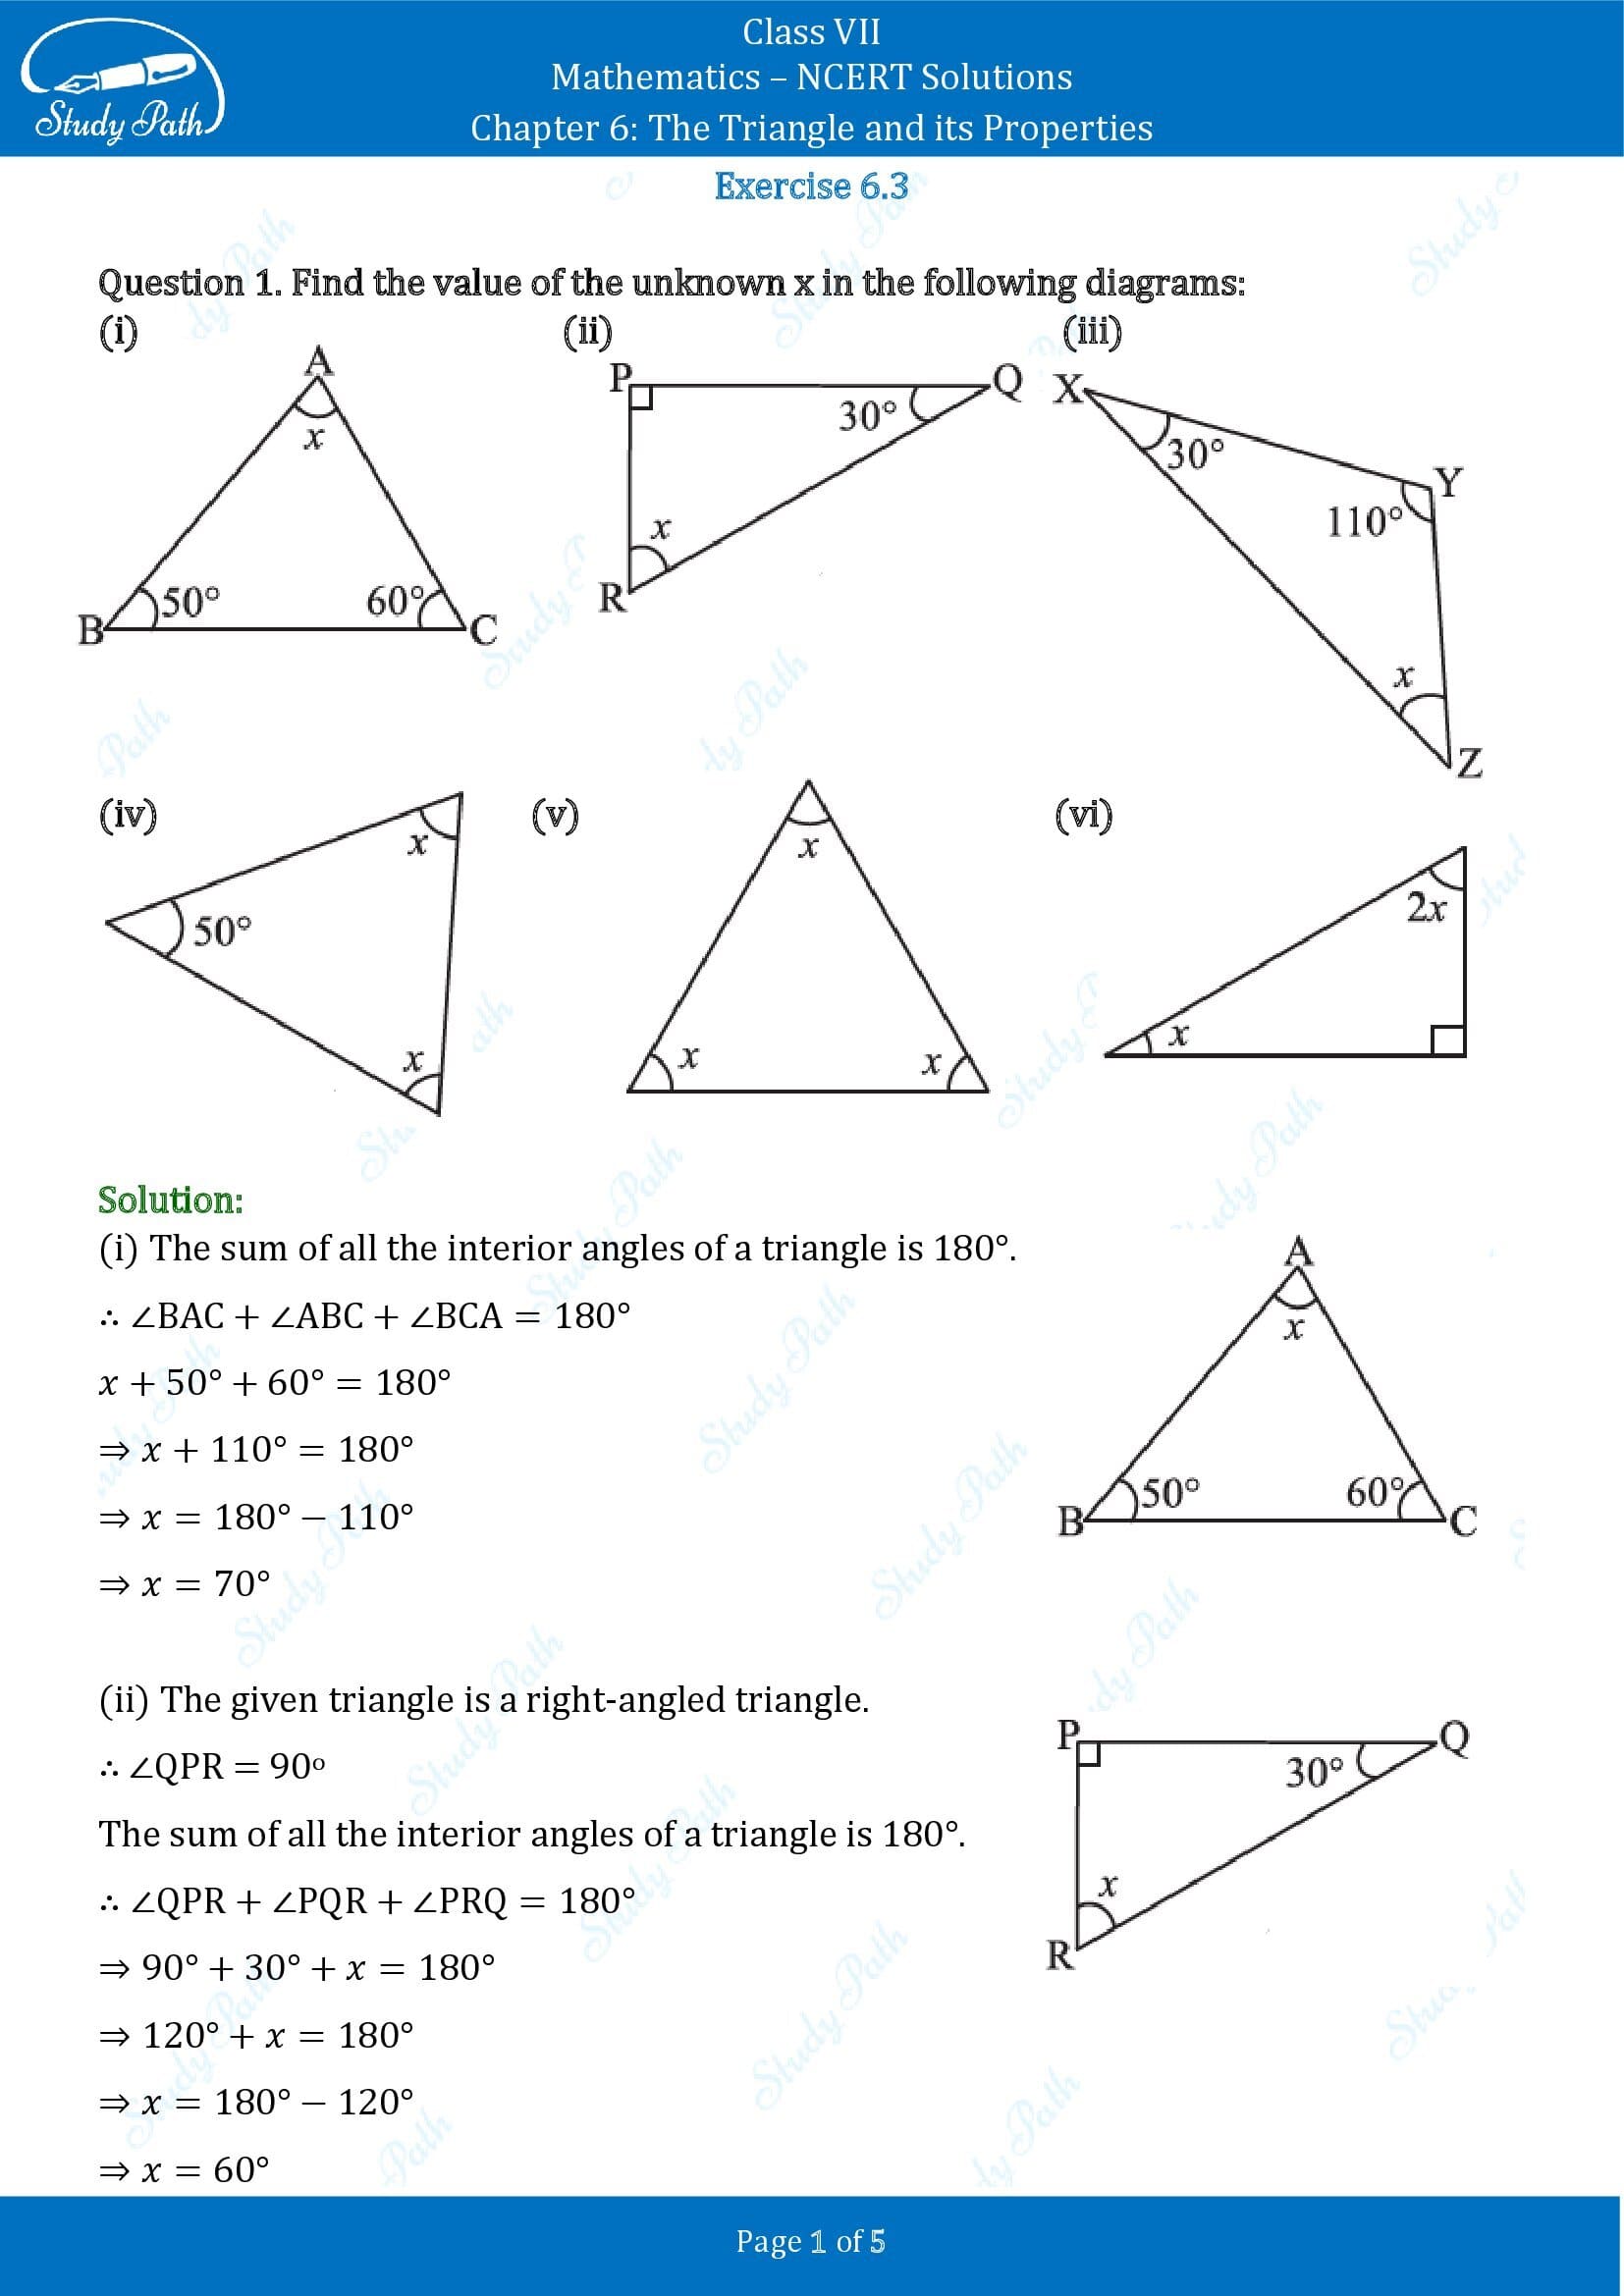 NCERT Solutions for Class 7 Maths Chapter 6 The Triangle and its Properties Exercise 6.3 00001